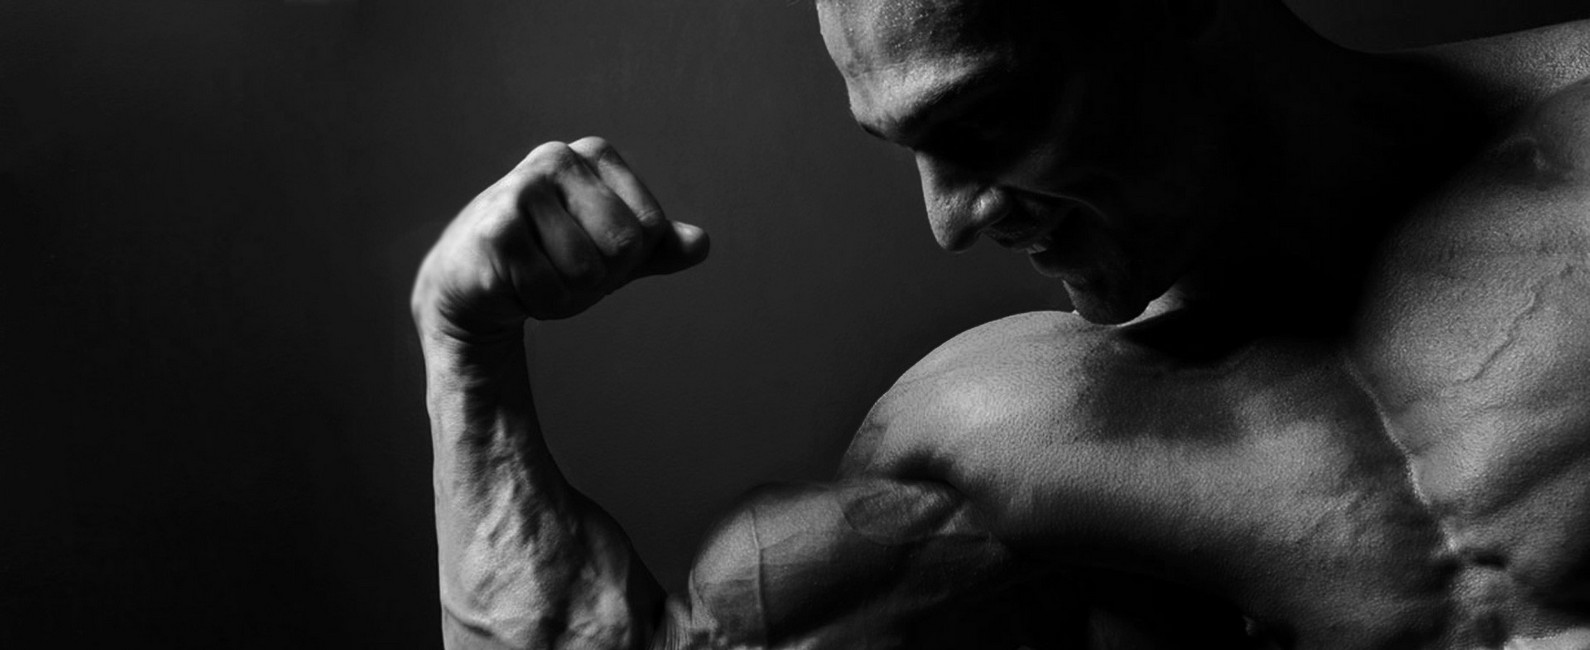 Cutting and bulking steroid cycle